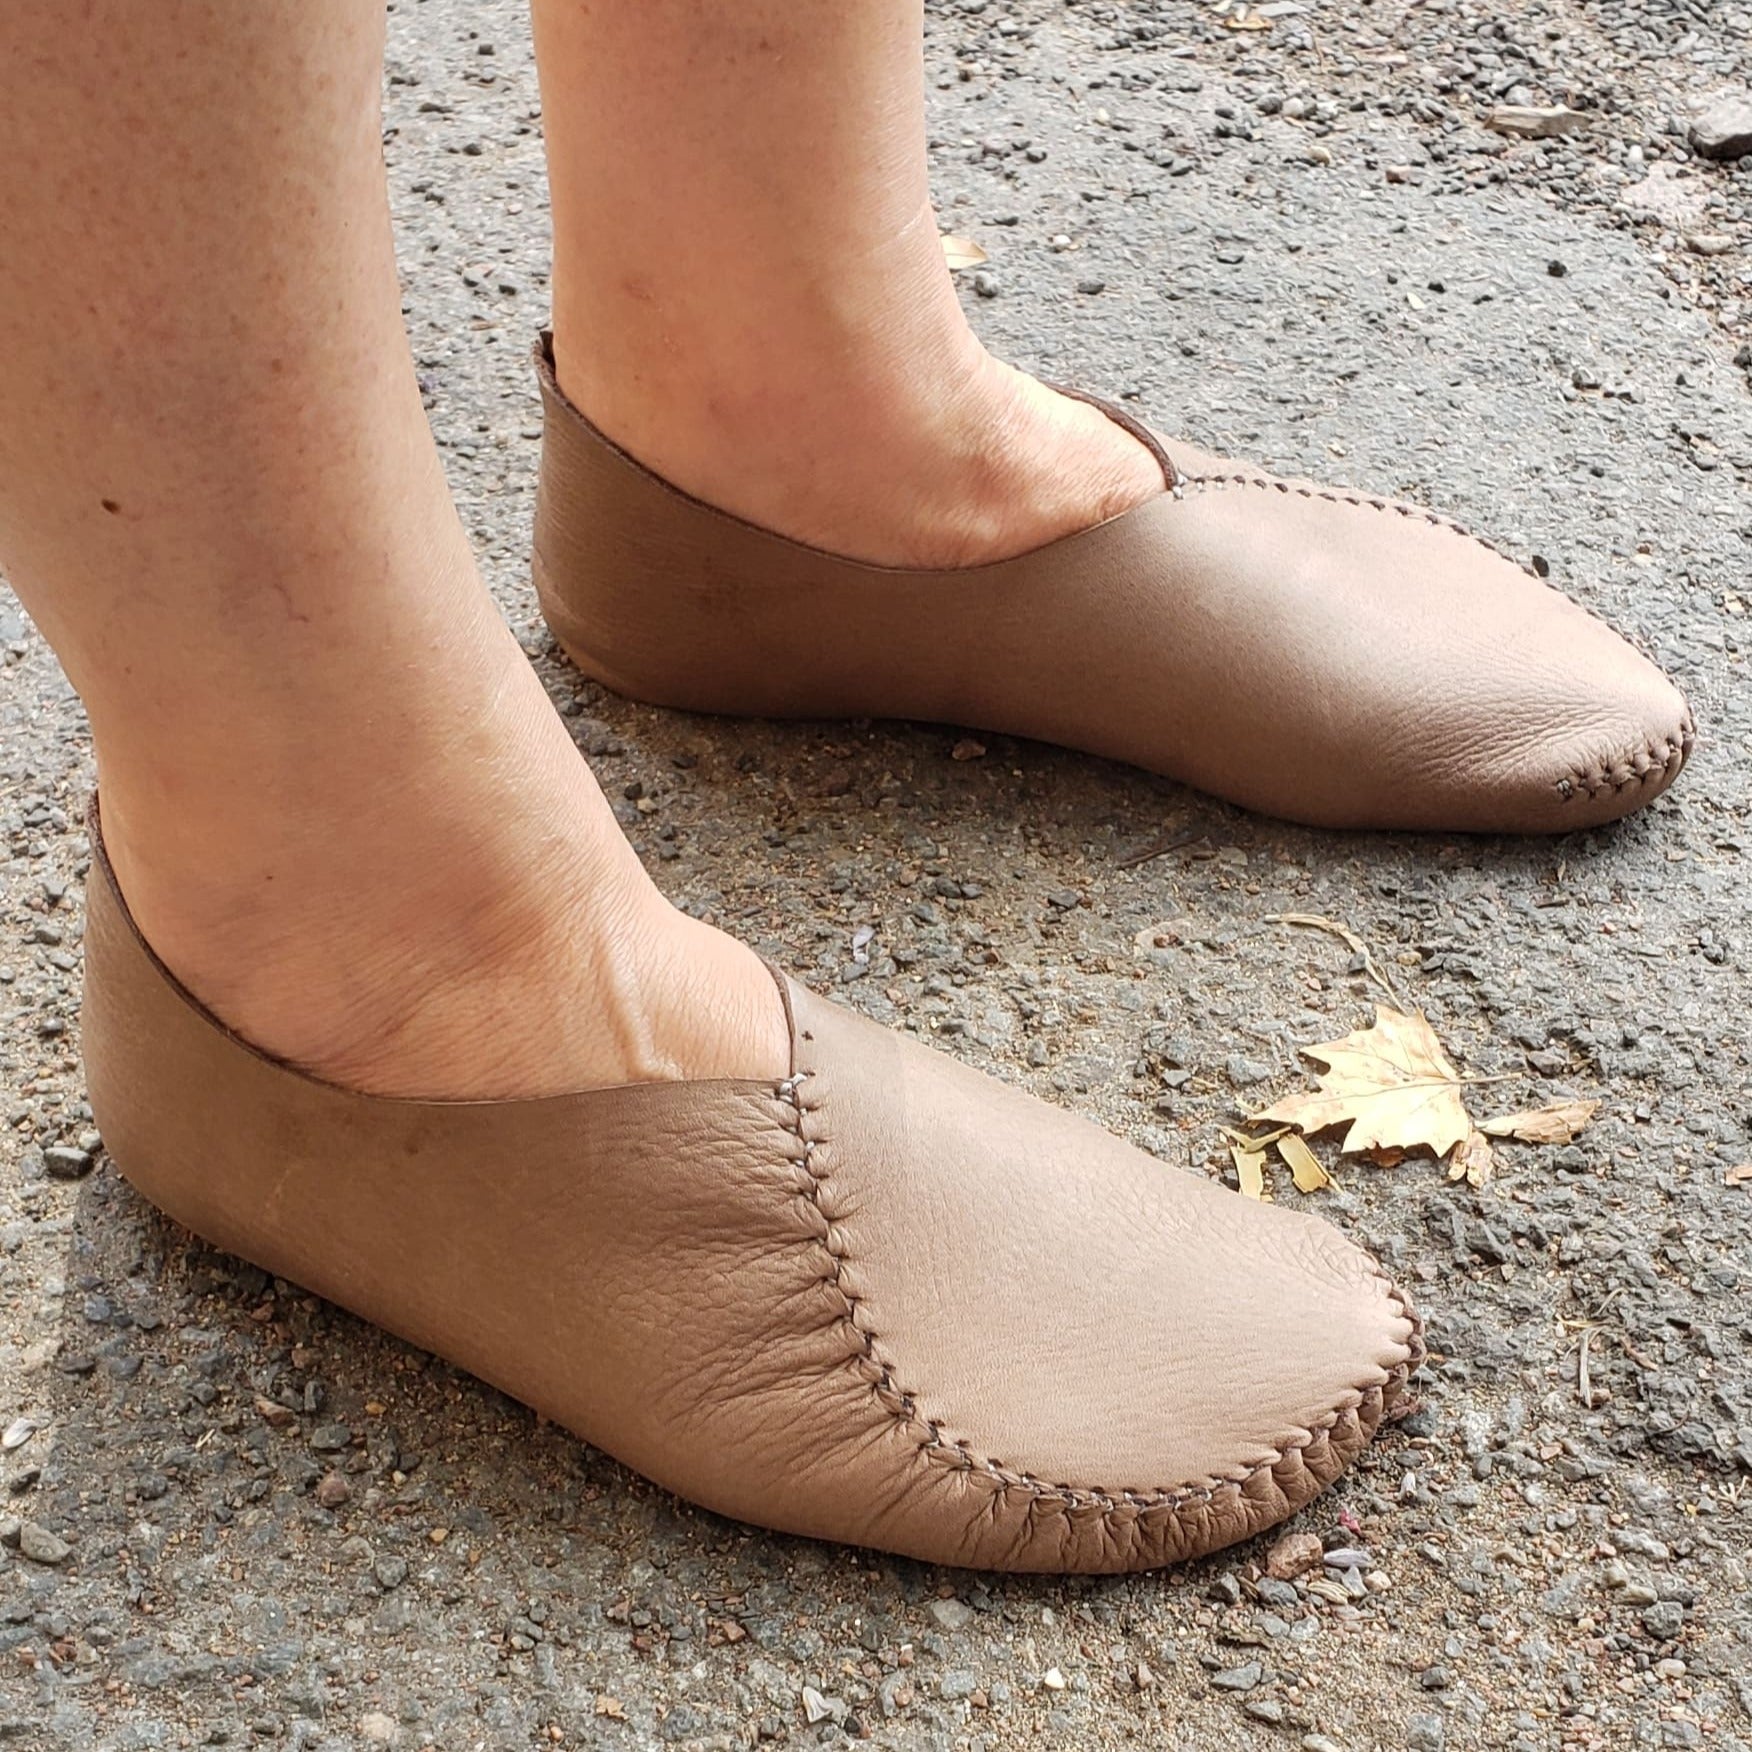 Leather barefoot Shoes "Heart" Style